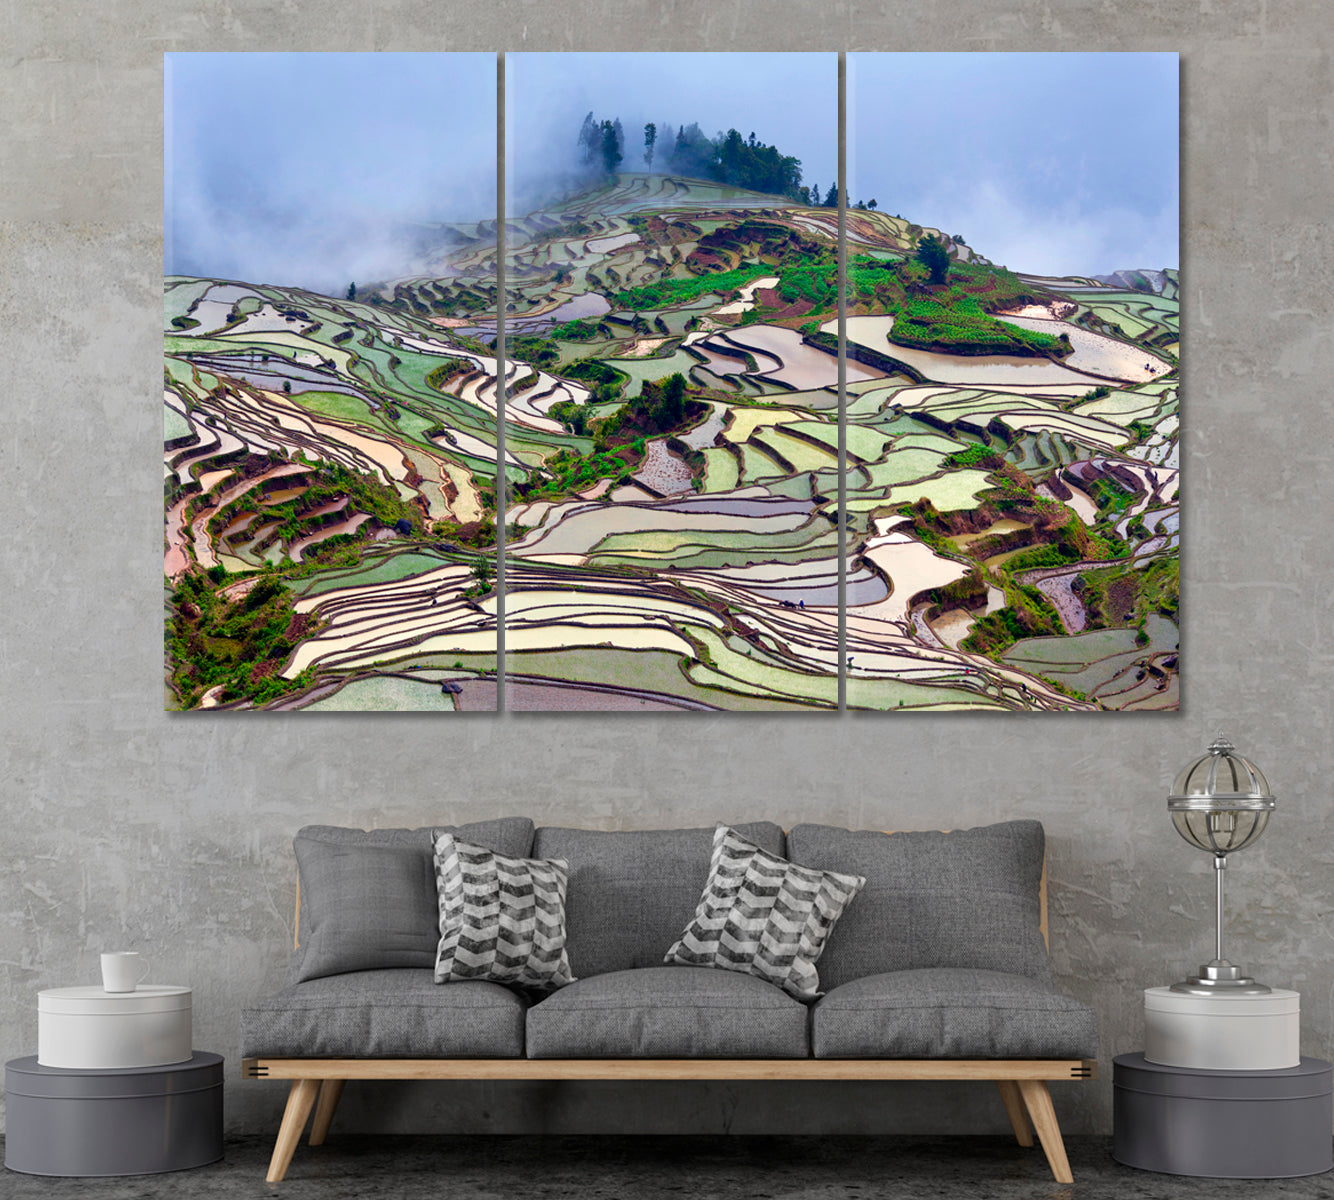 Terraced Rice Fields Yunnan China Canvas Print ArtLexy 3 Panels 36"x24" inches 